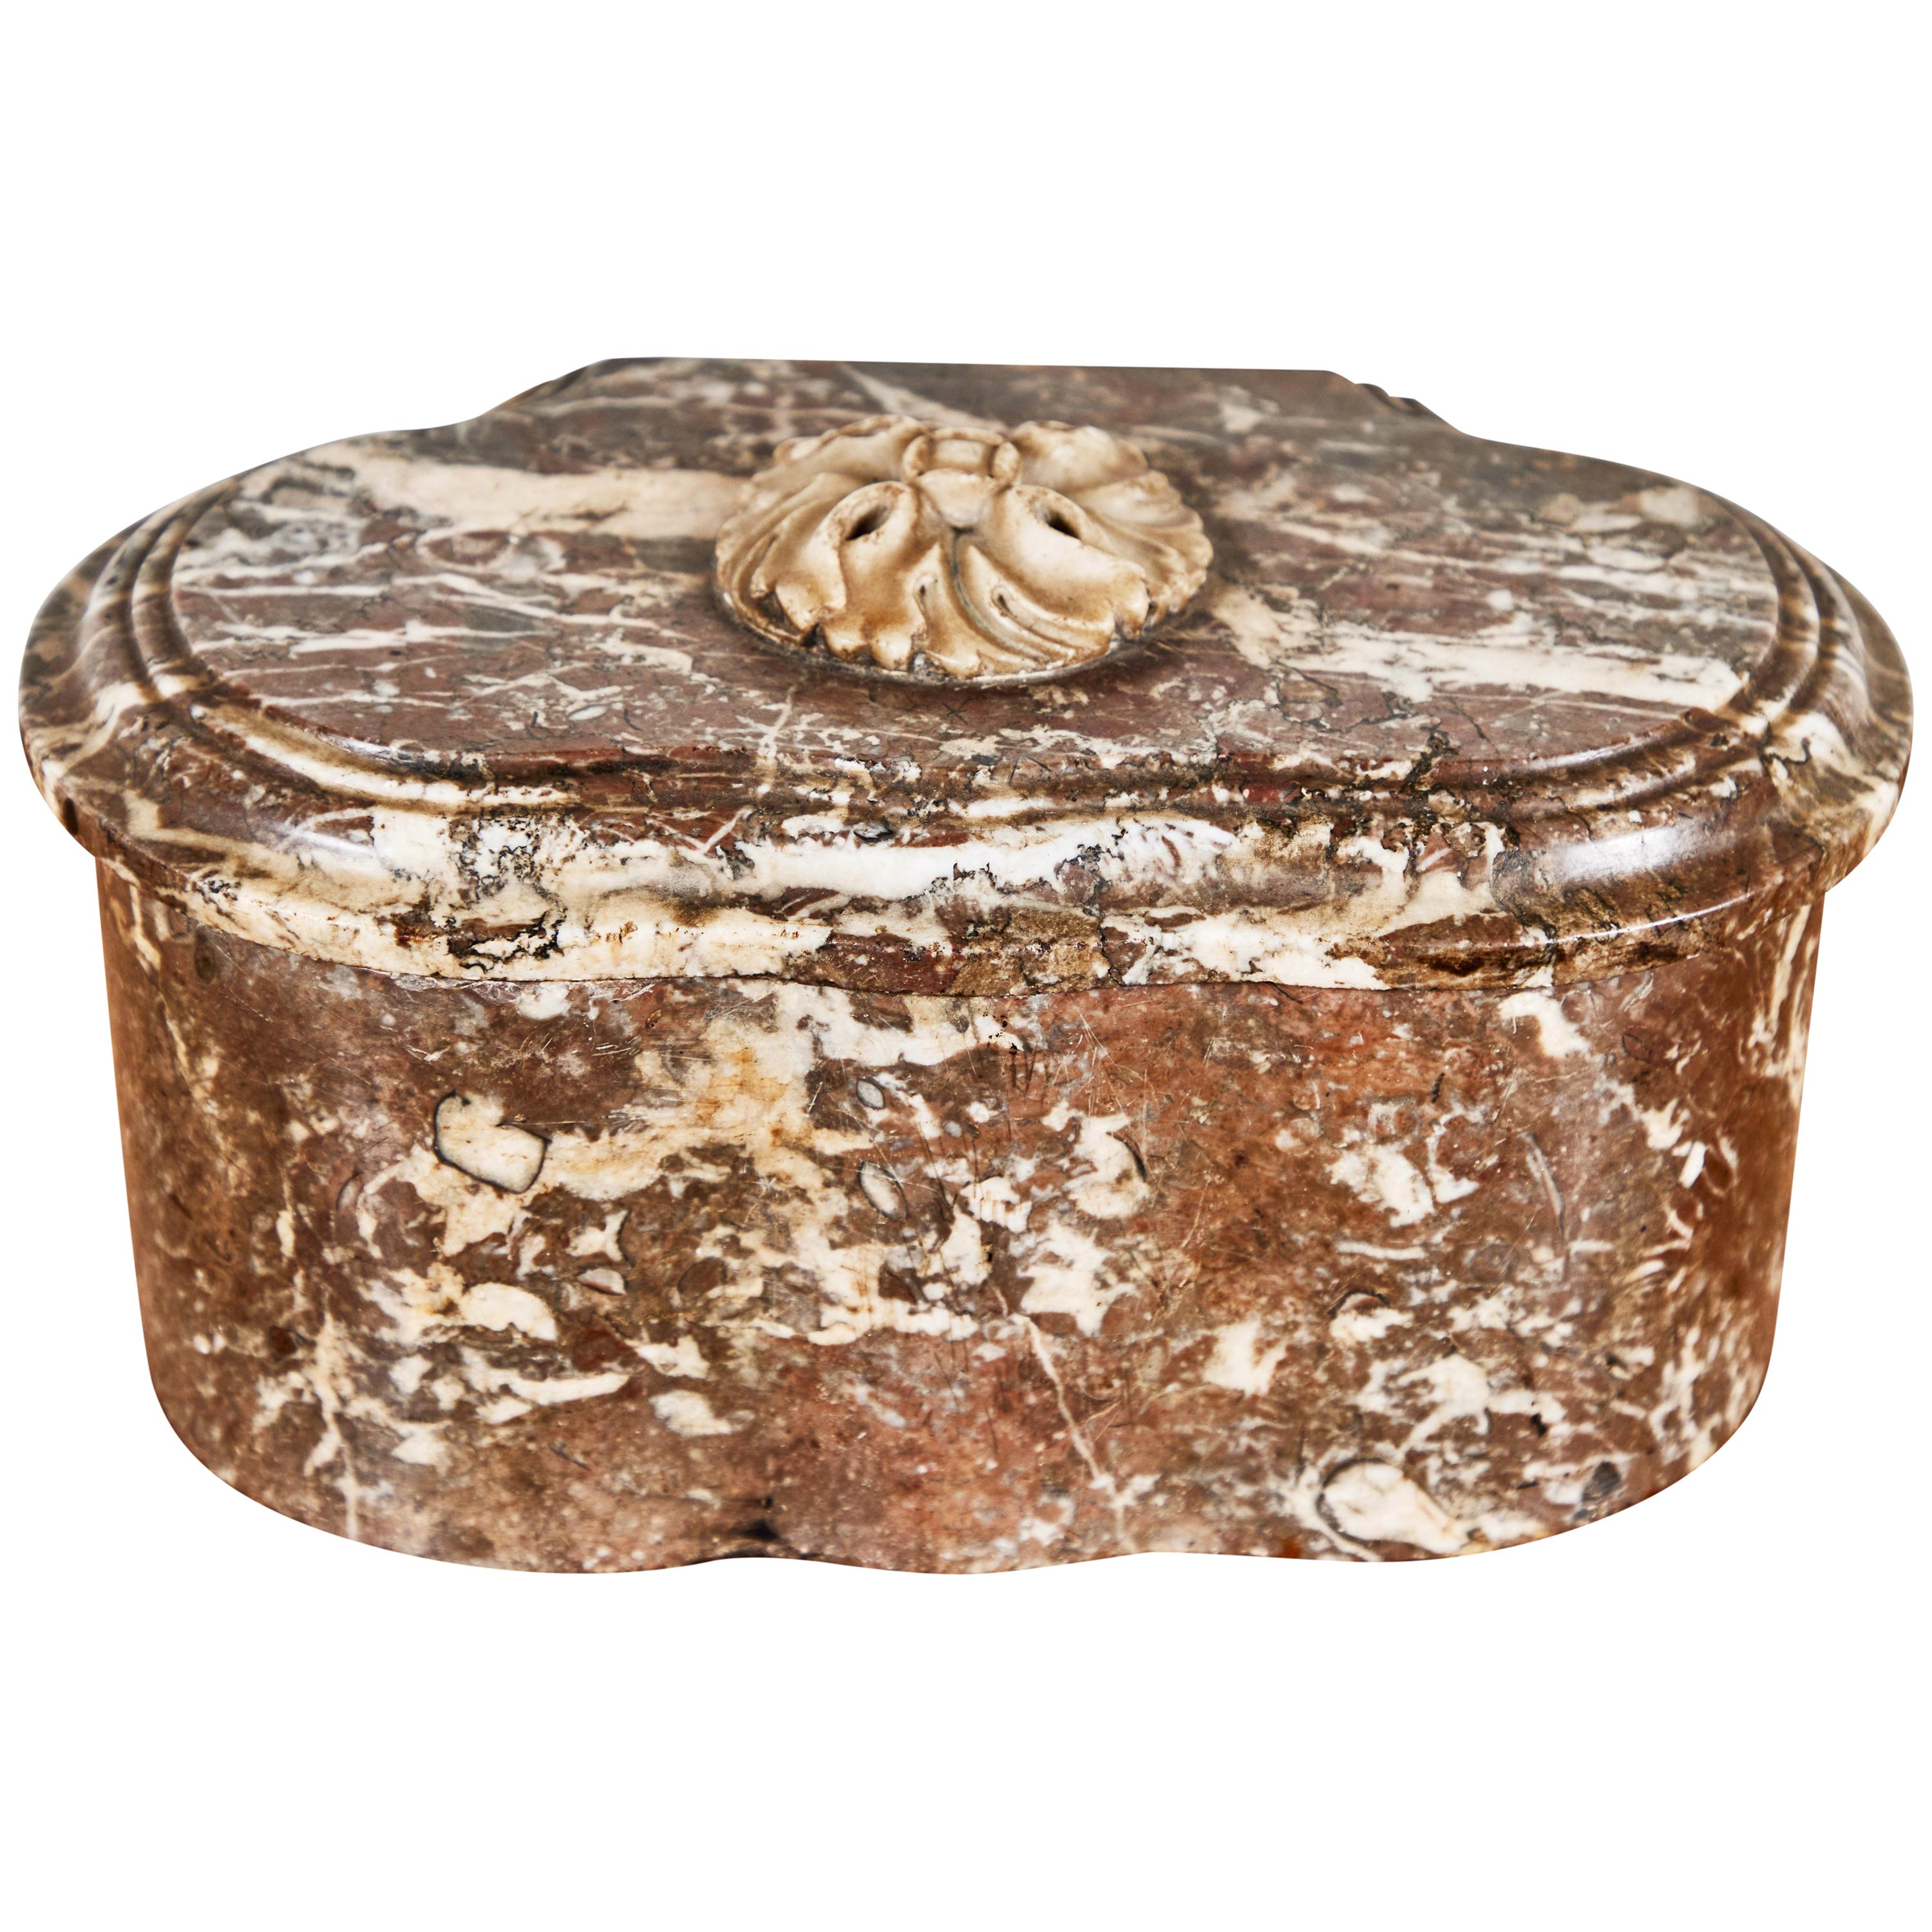 Rare, Antique, French, Chocolate Marble Box For Sale